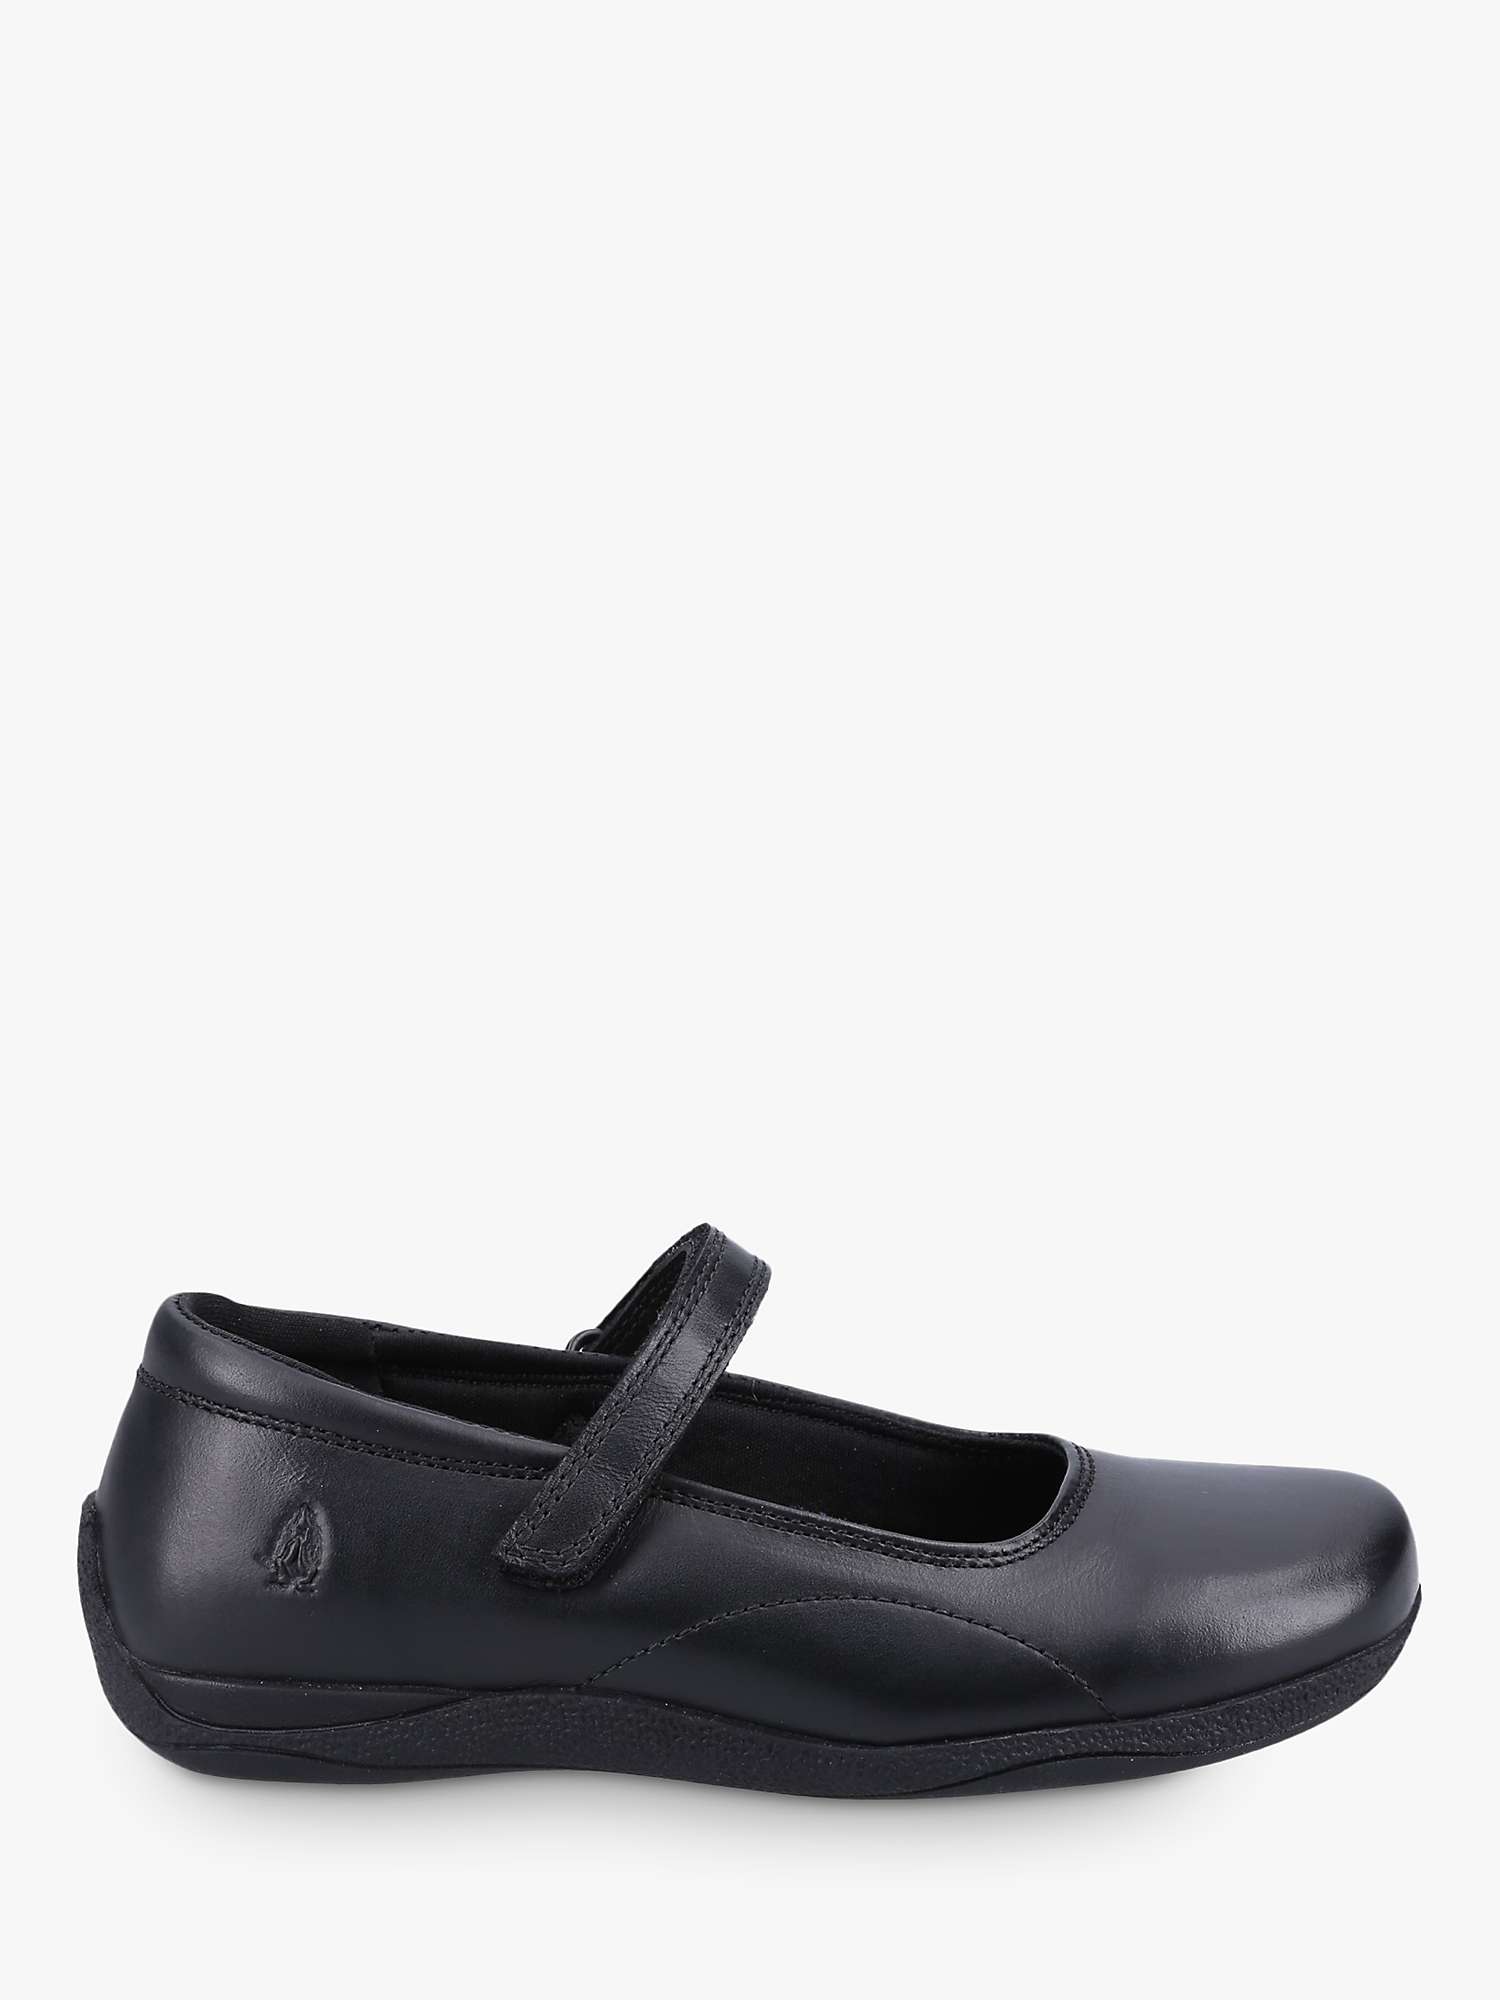 Buy Hush Puppies Aria School Shoes Online at johnlewis.com